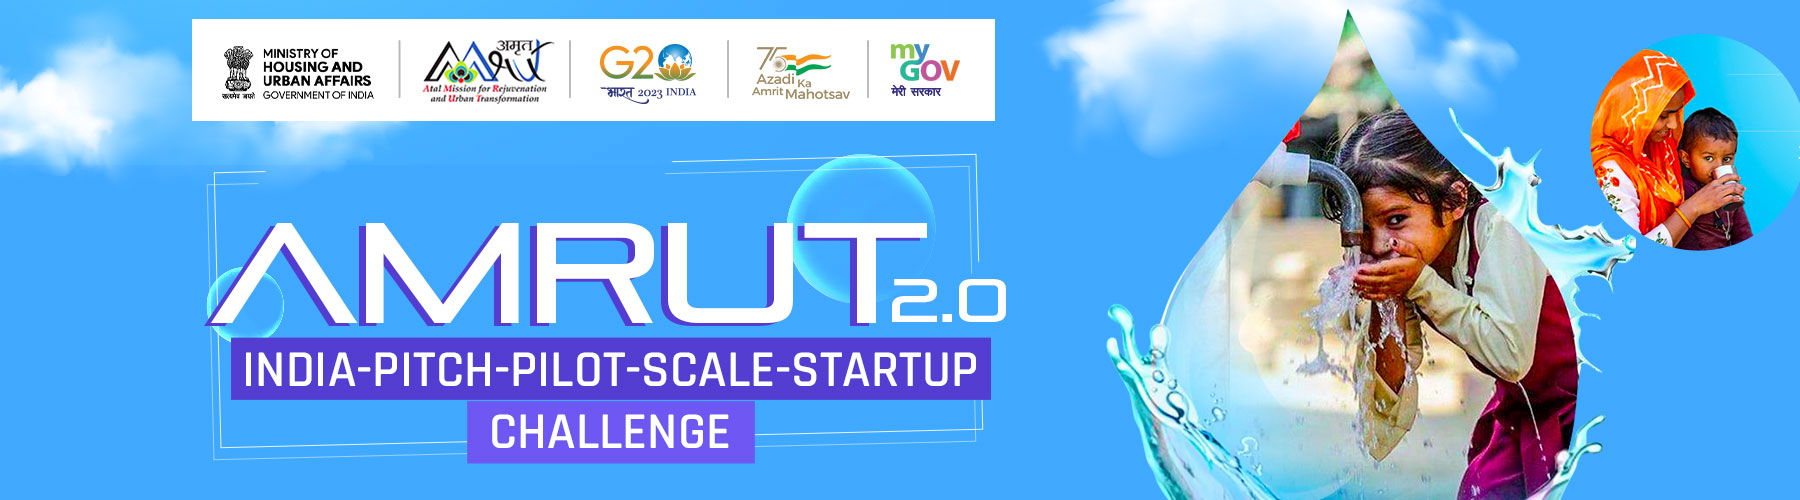 India Pitch Pilot Scale Startup